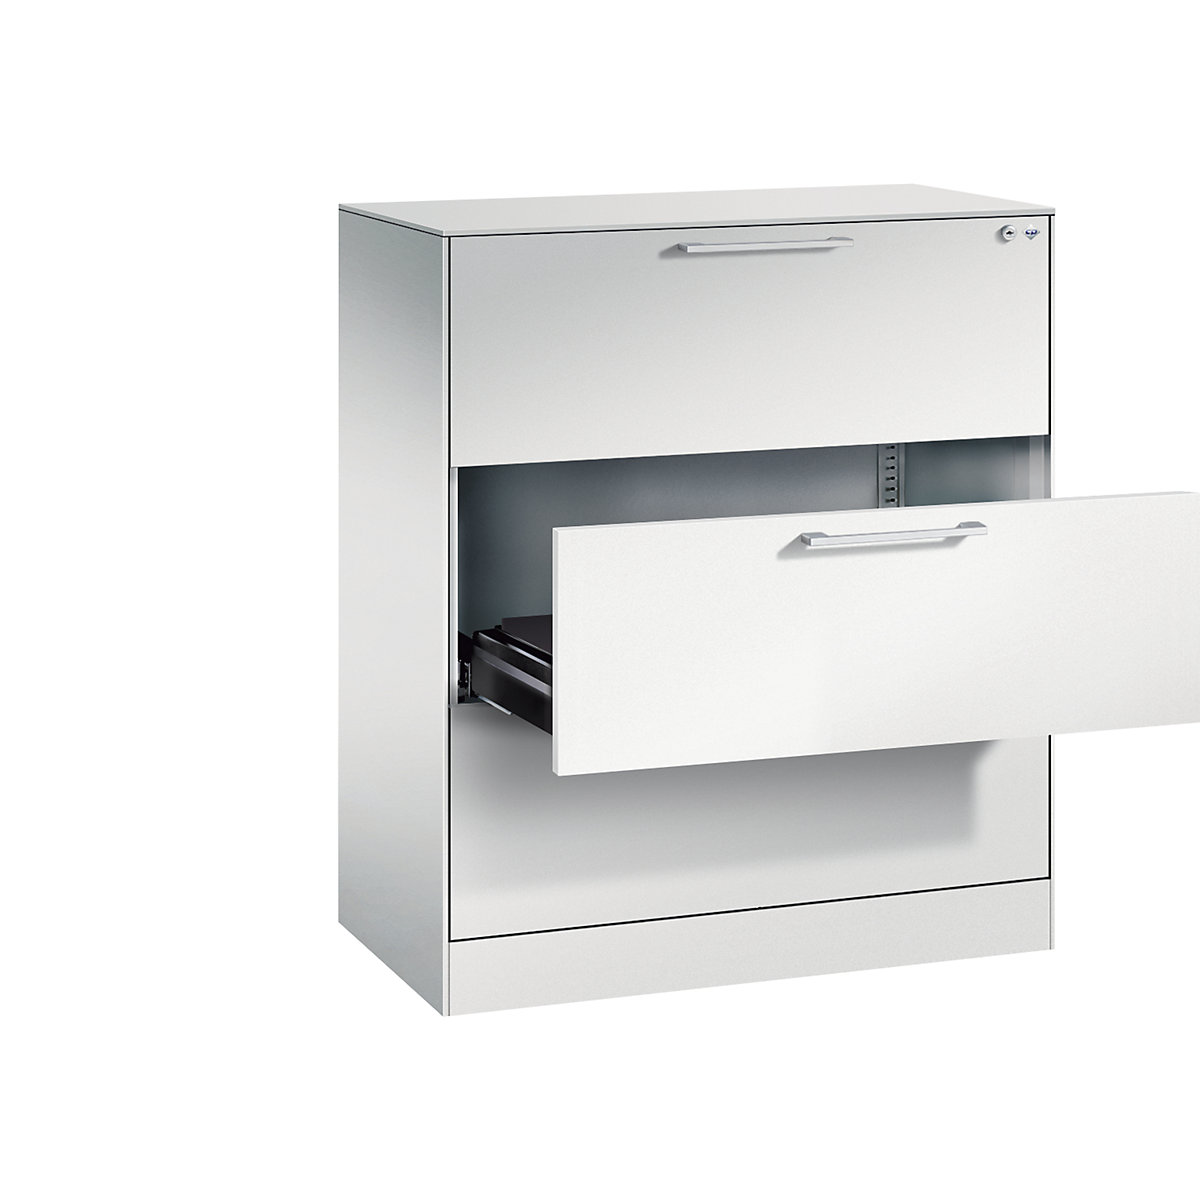 ASISTO card file cabinet – C+P, height 992 mm, with 3 drawers, A4 landscape, light grey/light grey-12